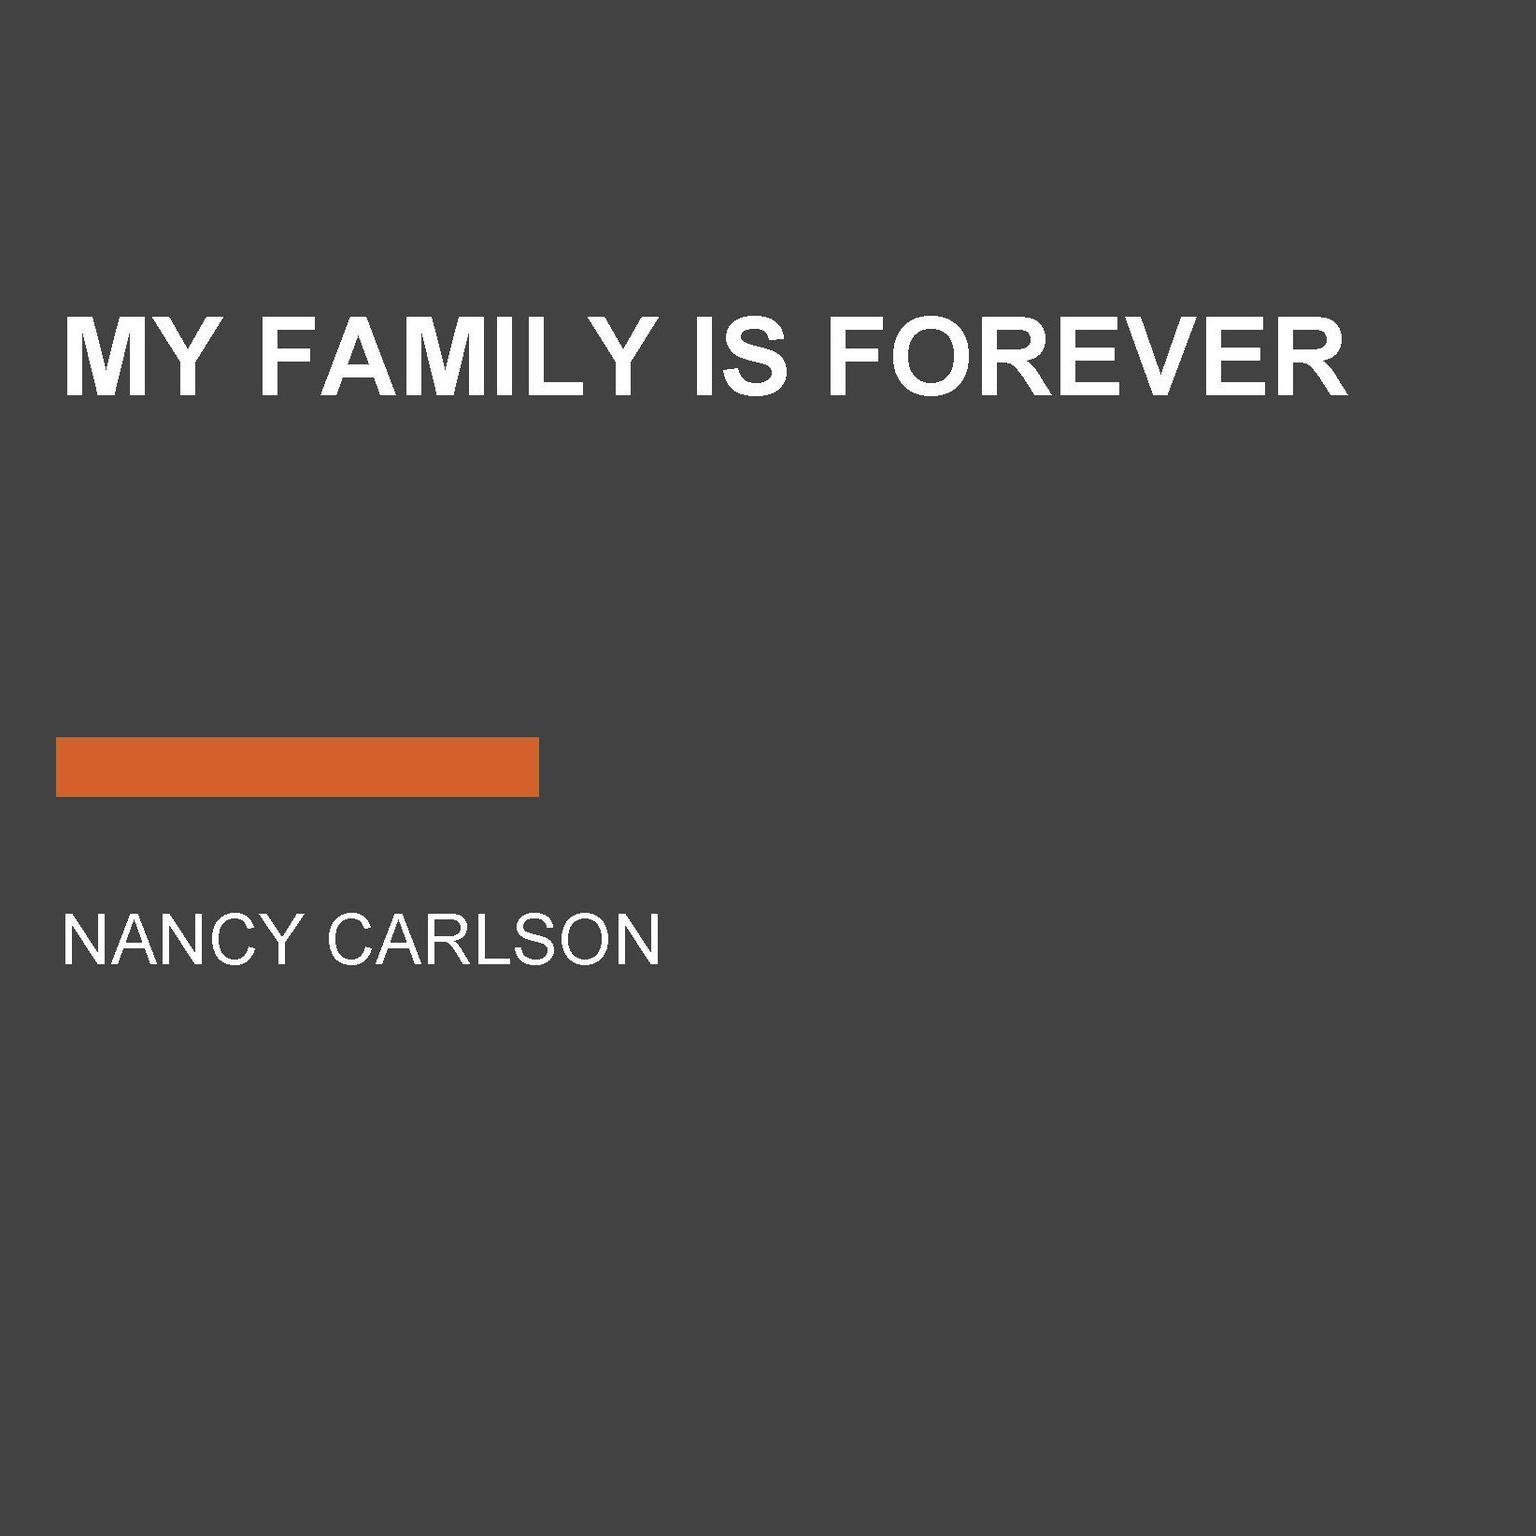 My Family is Forever Audiobook, by Nancy Carlson